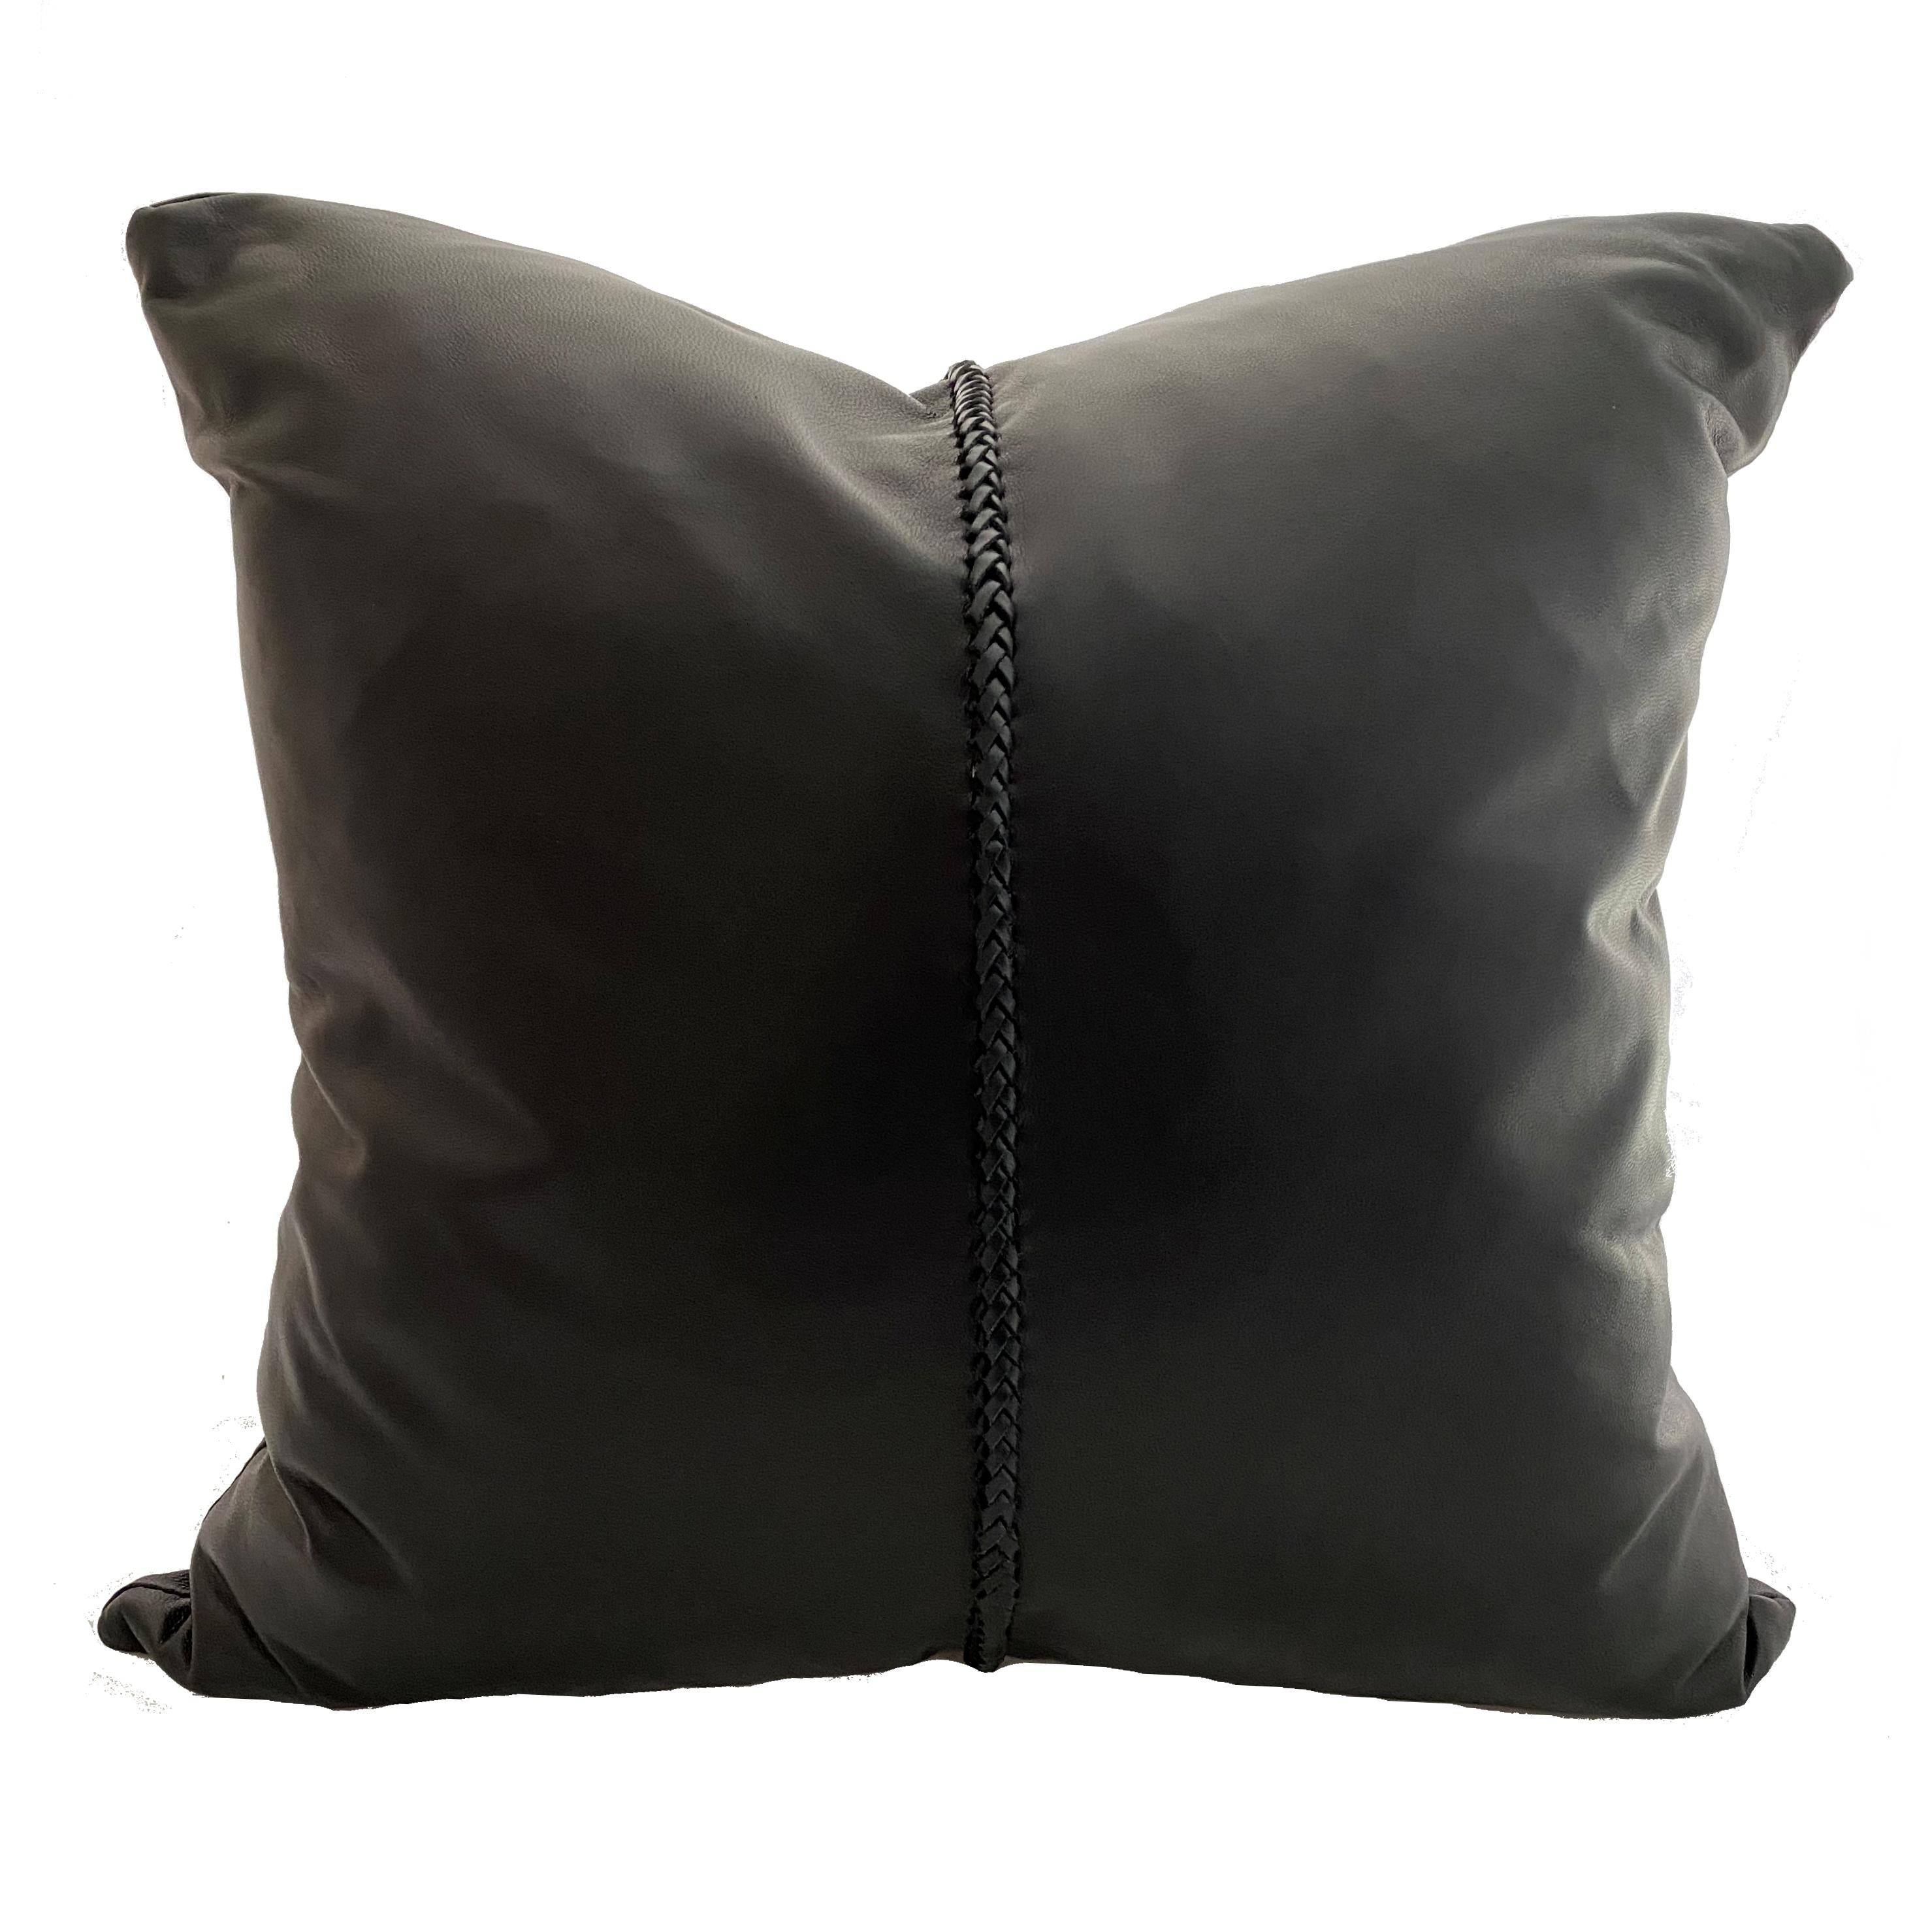 Create a quick and easy designer look with this eluxury home, black leather pillow. Intricately hand-crafted using honored time leather craftsmanship paired back with stylish contemporary design.
Designed by artisan, Emily Barbara, the soft Italian